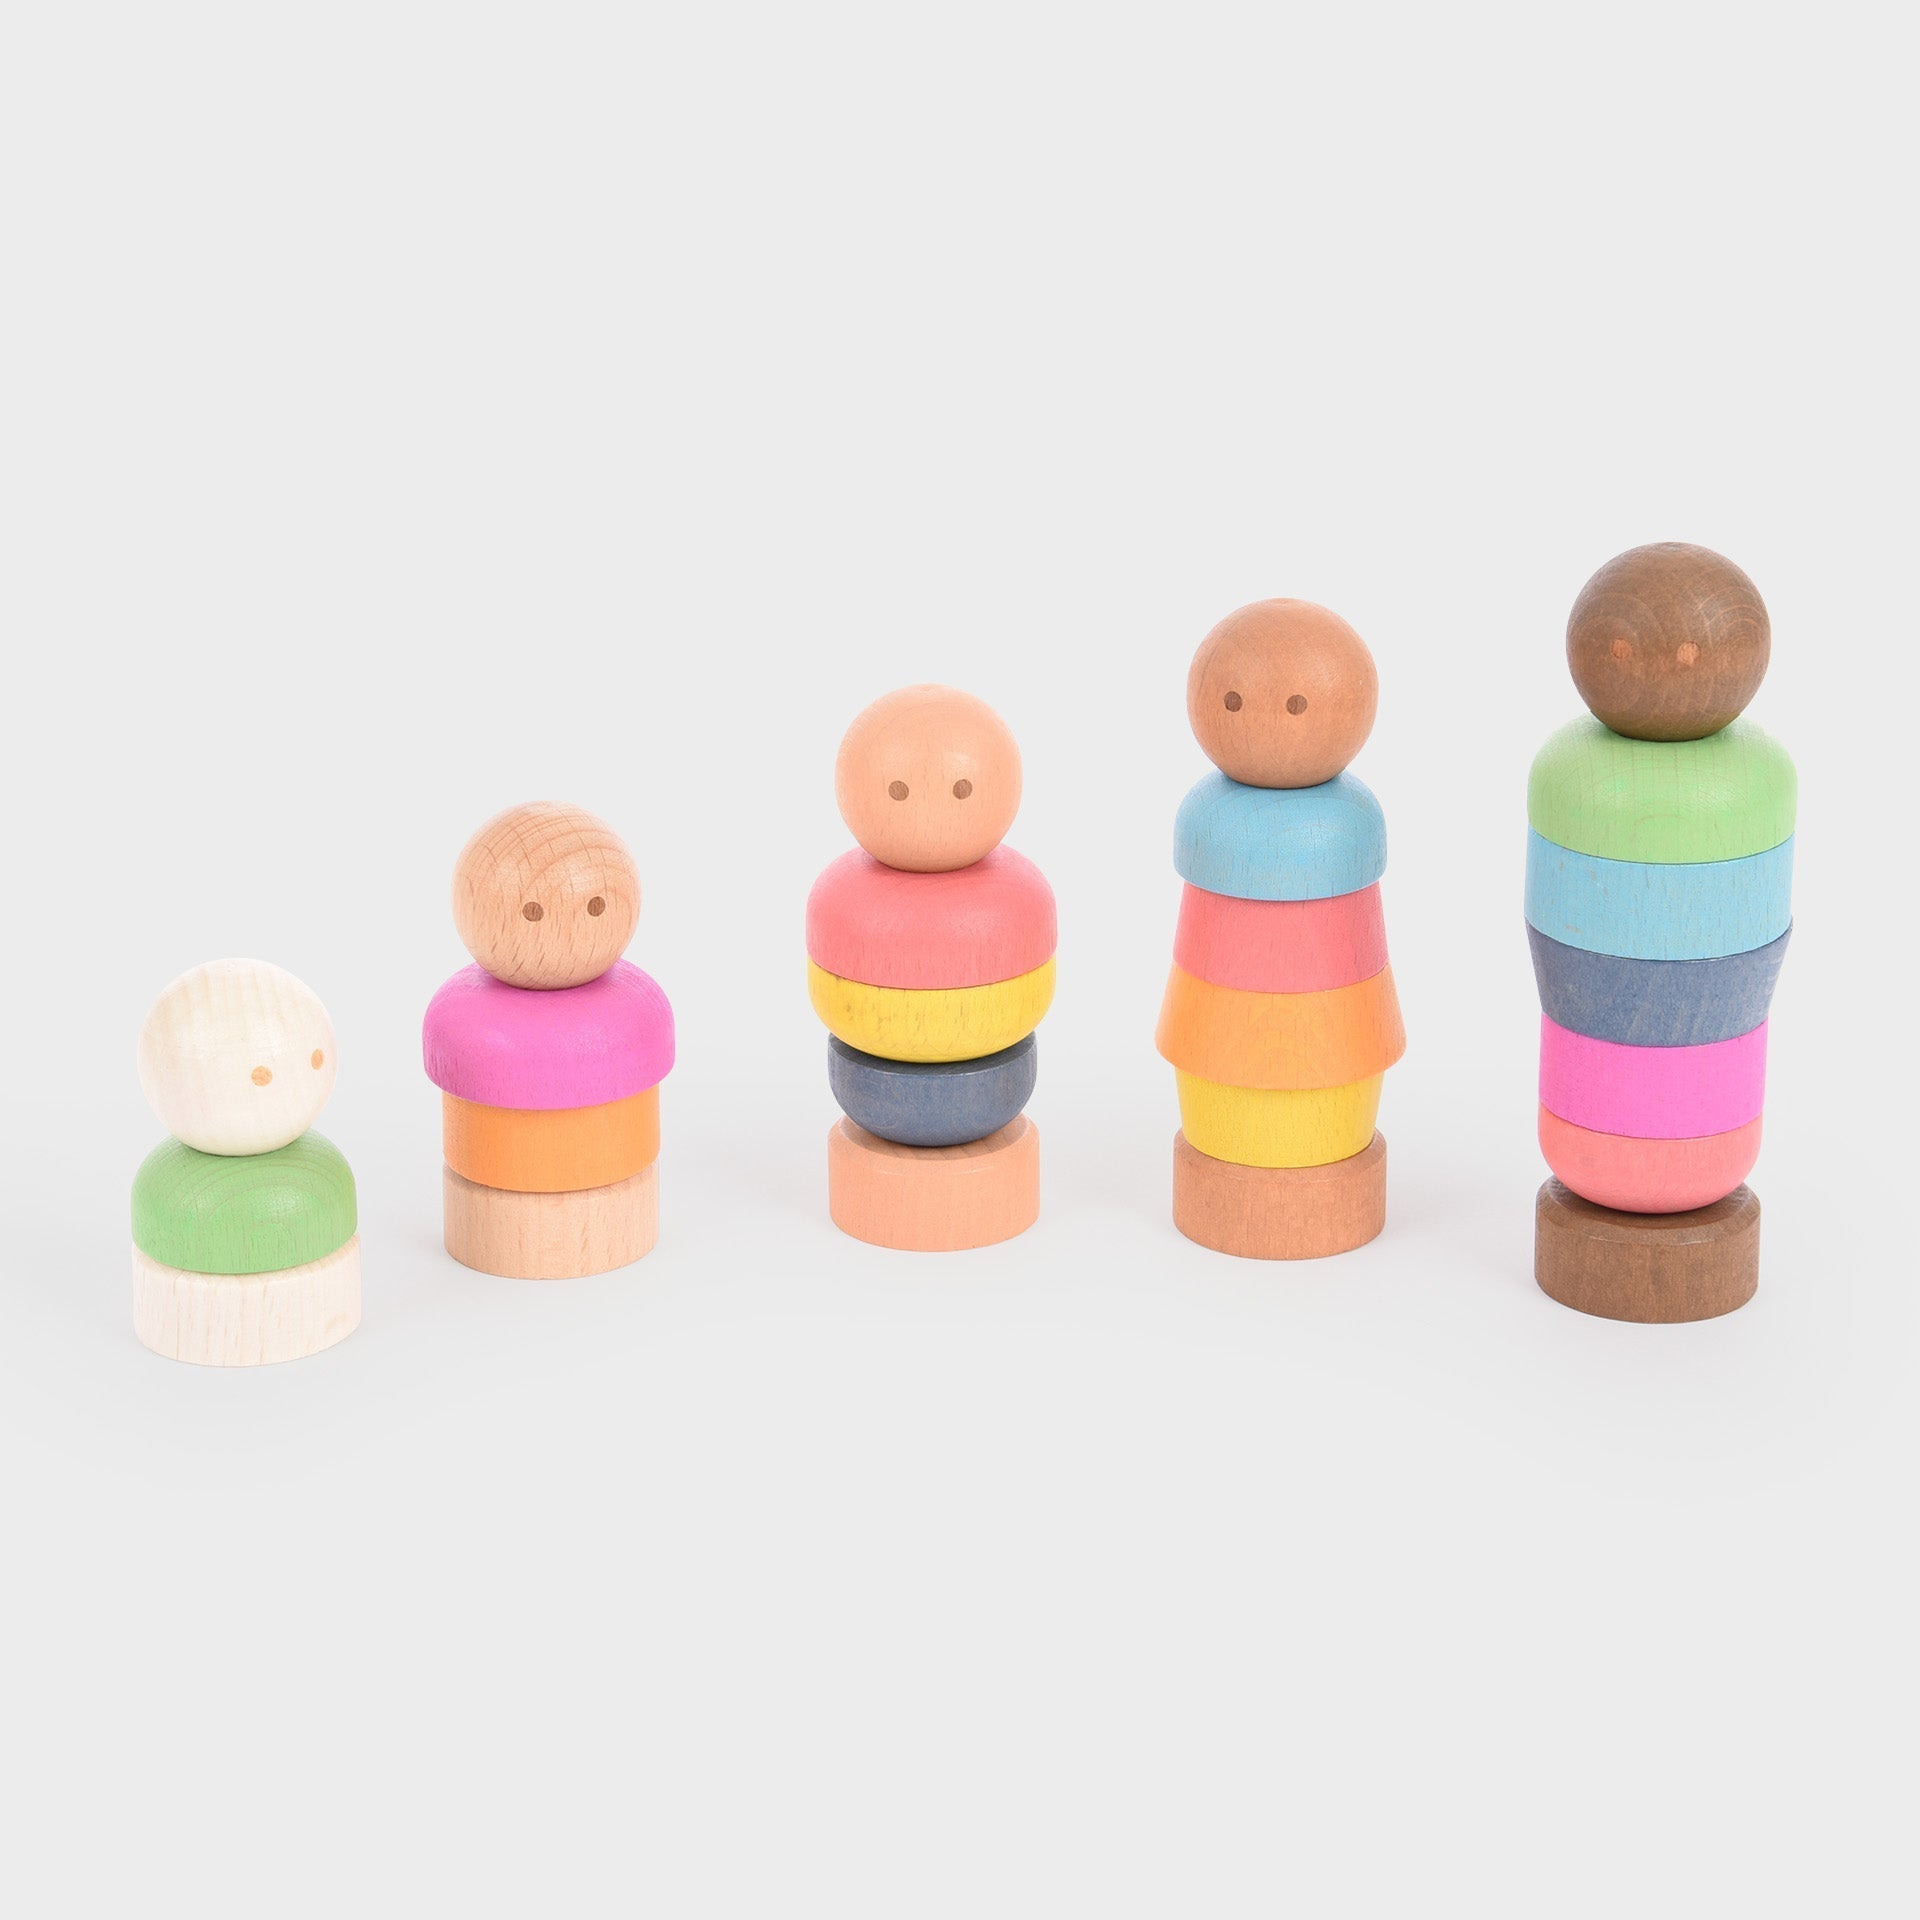 Rainbow Wooden Community People, Our TickiT® Rainbow Wooden Community People are fantastic for small world play.Made from beautiful smooth solid beechwood with a natural woodgrain finish, the threaded figures represent a diverse range of 5 different skin tones, and the bodies can be imaginatively clothed using rainbow-coloured cuffs which slide on easily. These tactile characters are secured by screwing on the “feet” to create different shaped, sized and coloured bodies of various heights and skin tones for